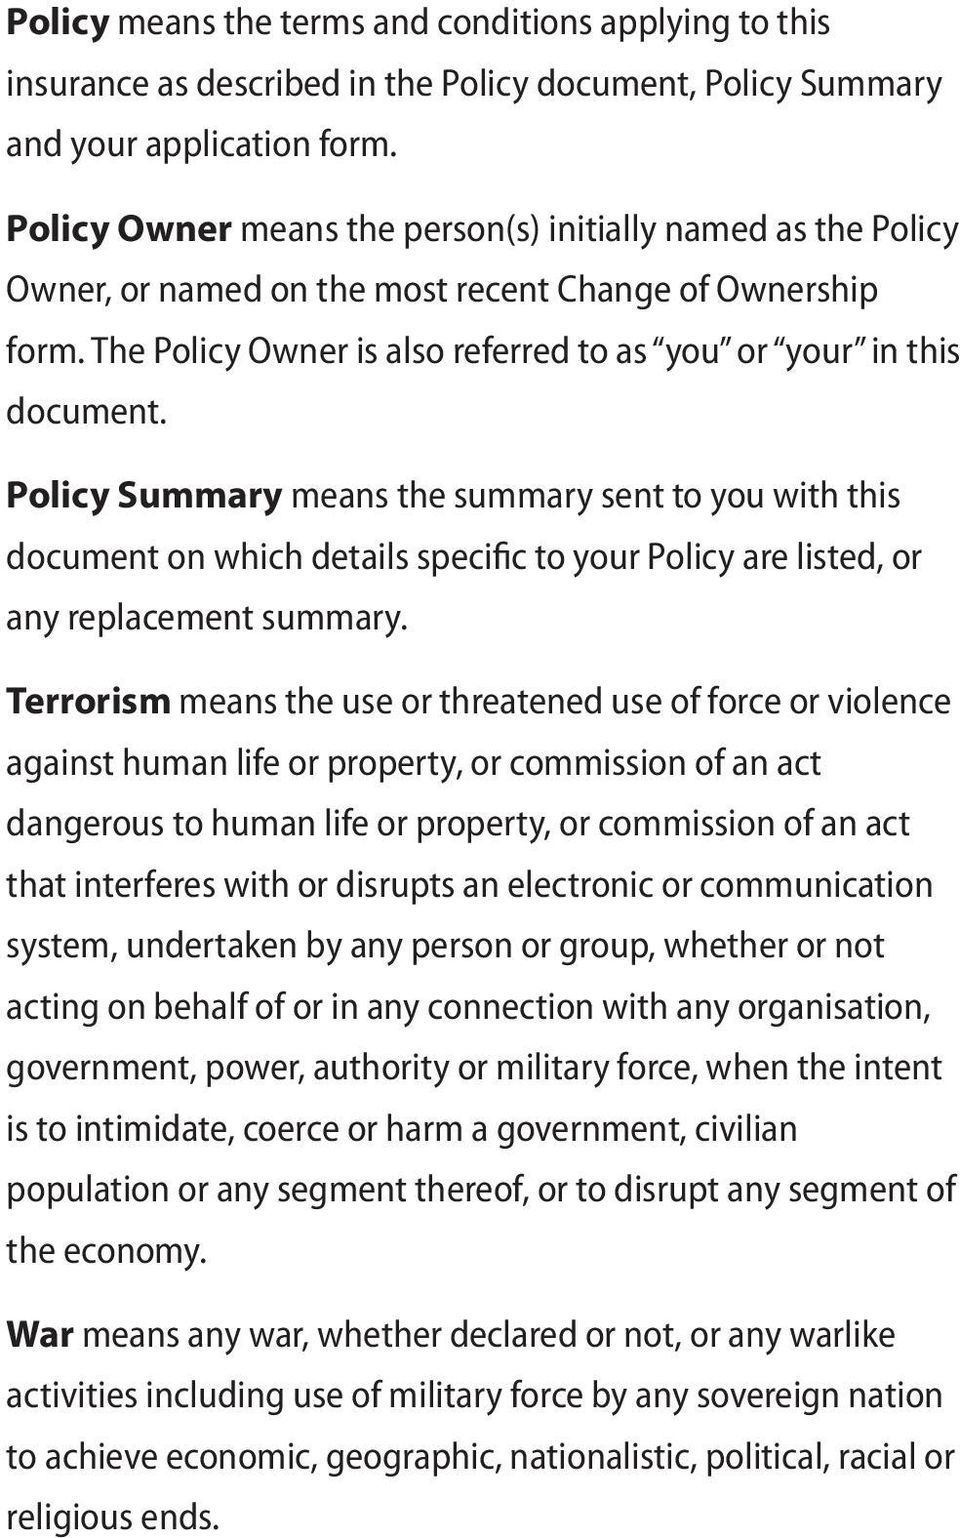 Policy Summary means the summary sent to you with this document on which details specific to your Policy are listed, or any replacement summary.